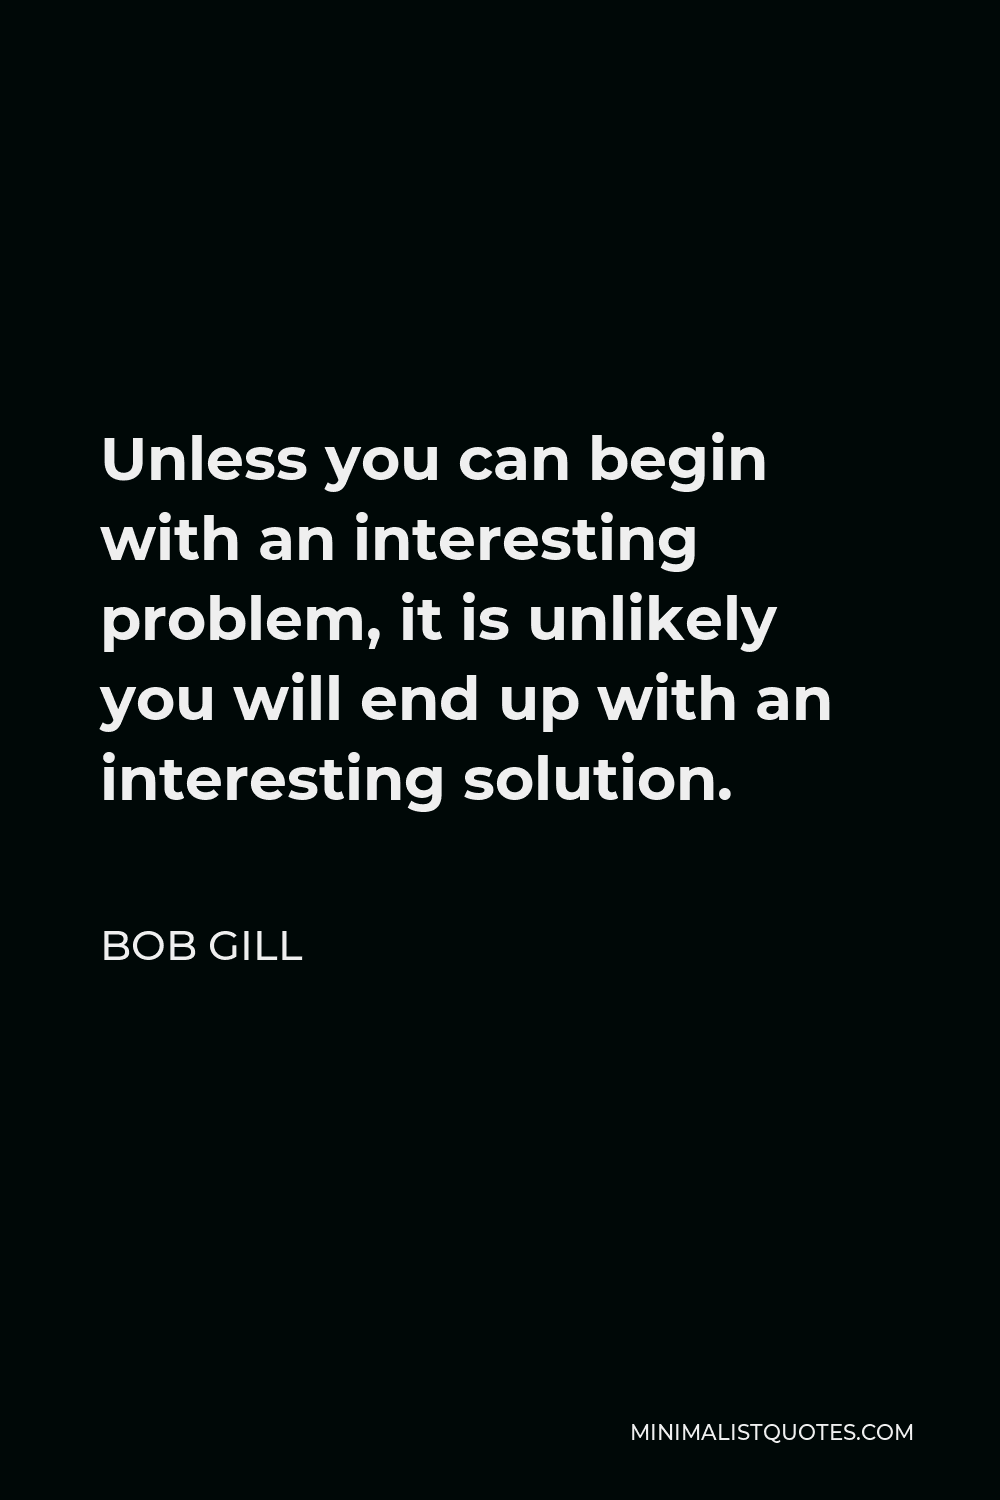 Bob Gill Quote - Unless you can begin with an interesting problem, it is unlikely you will end up with an interesting solution.